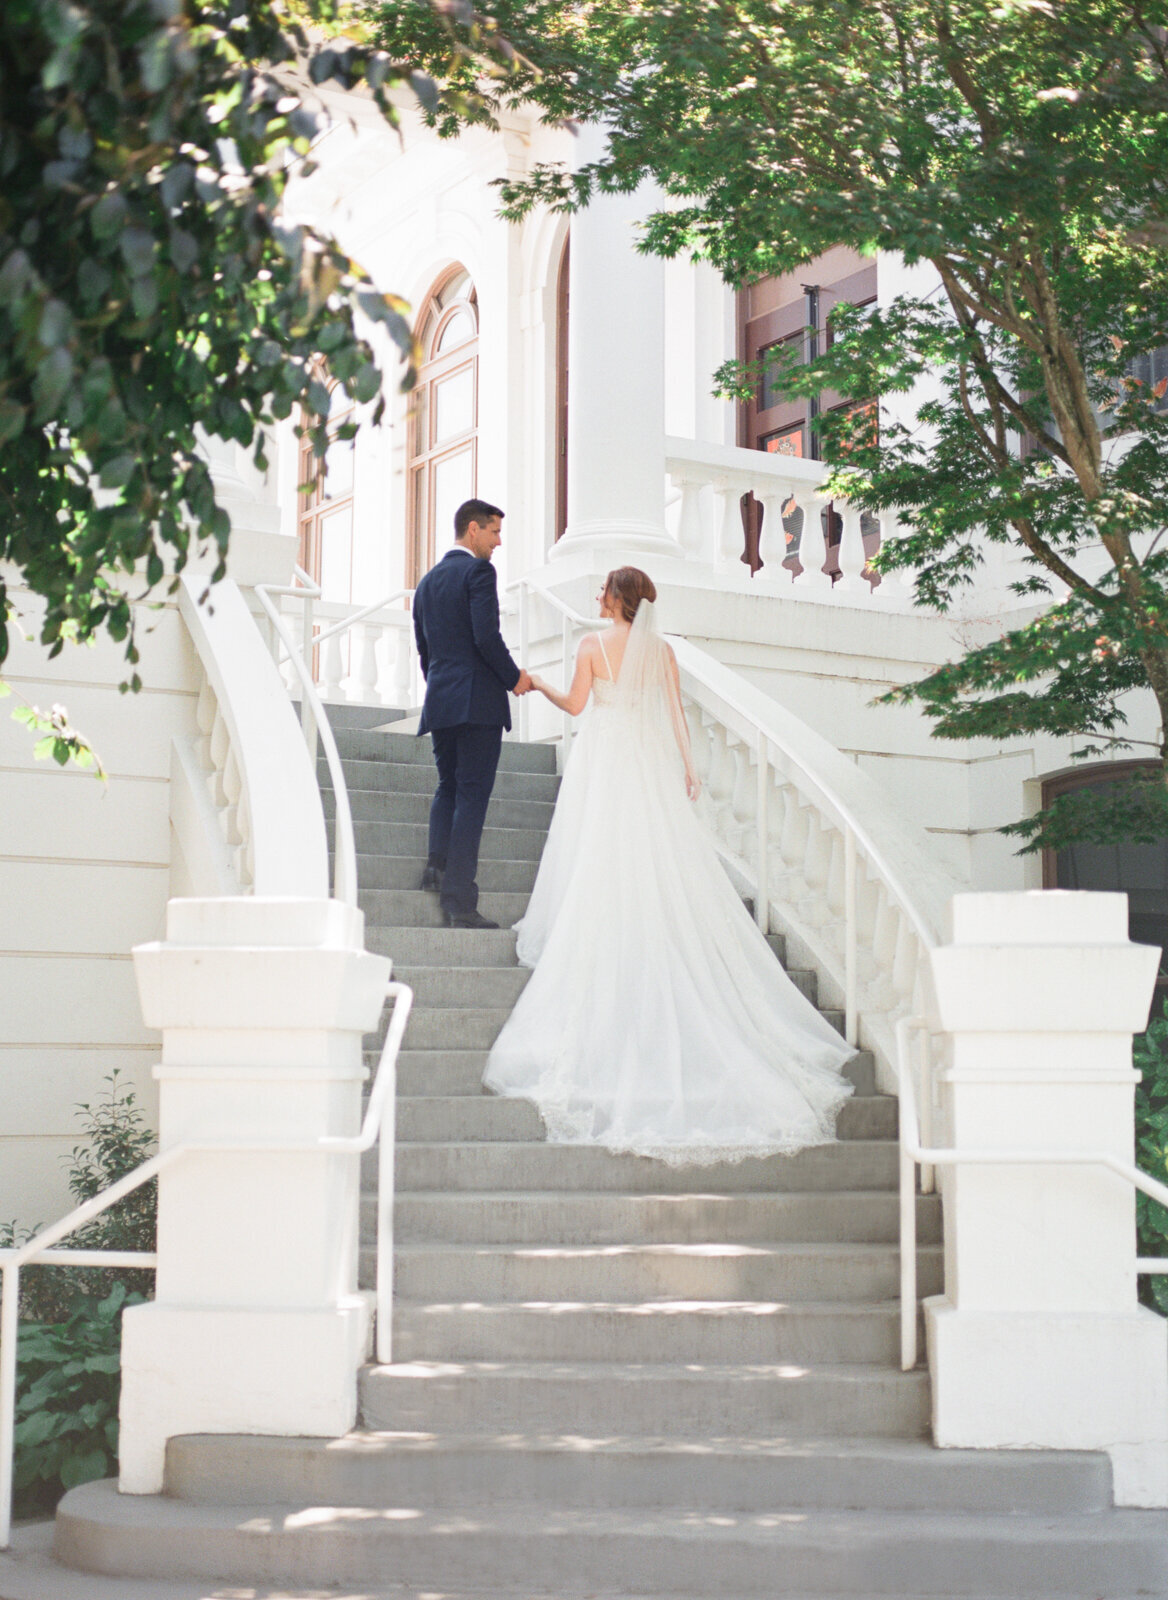 Bride and groom on stunning white elegant staircase, bridal gown with flowing train, captured by Ana Douglas Photography, timeless and authentic wedding photographer in Vancouver, BC. Featured on the Bronte Bride Vendor Guide.